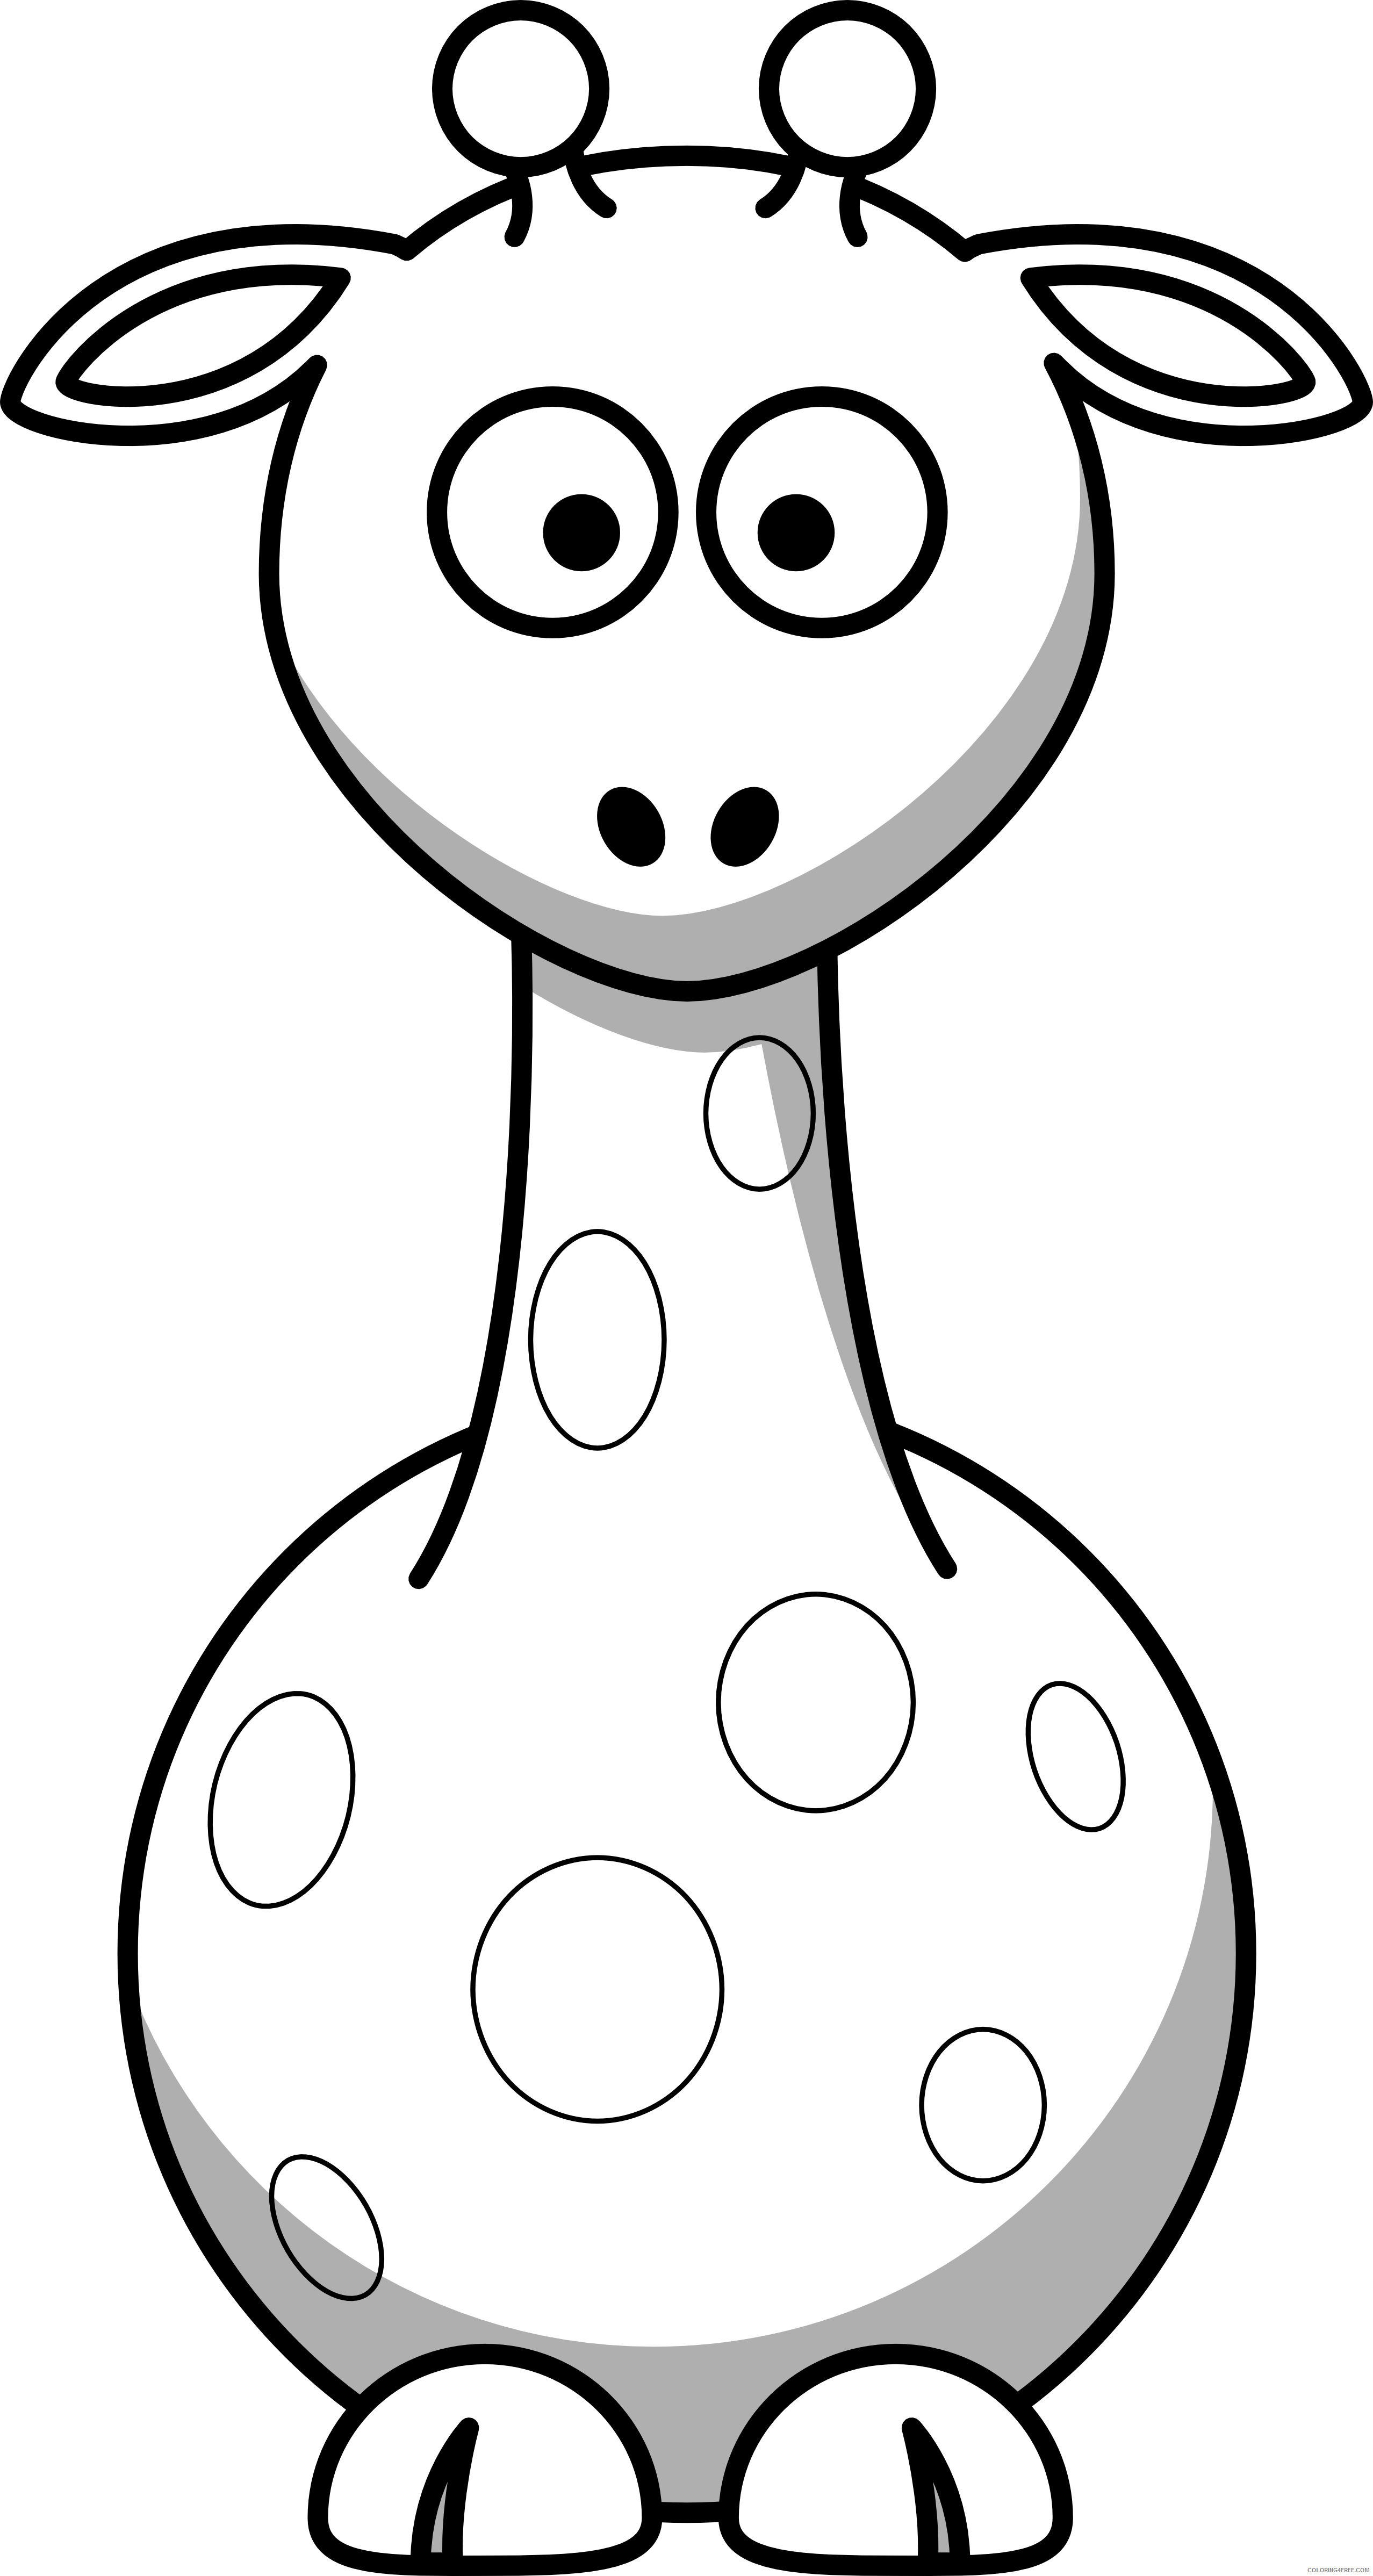 Giraffe Coloring Pages giraffe black and Printable Coloring4free